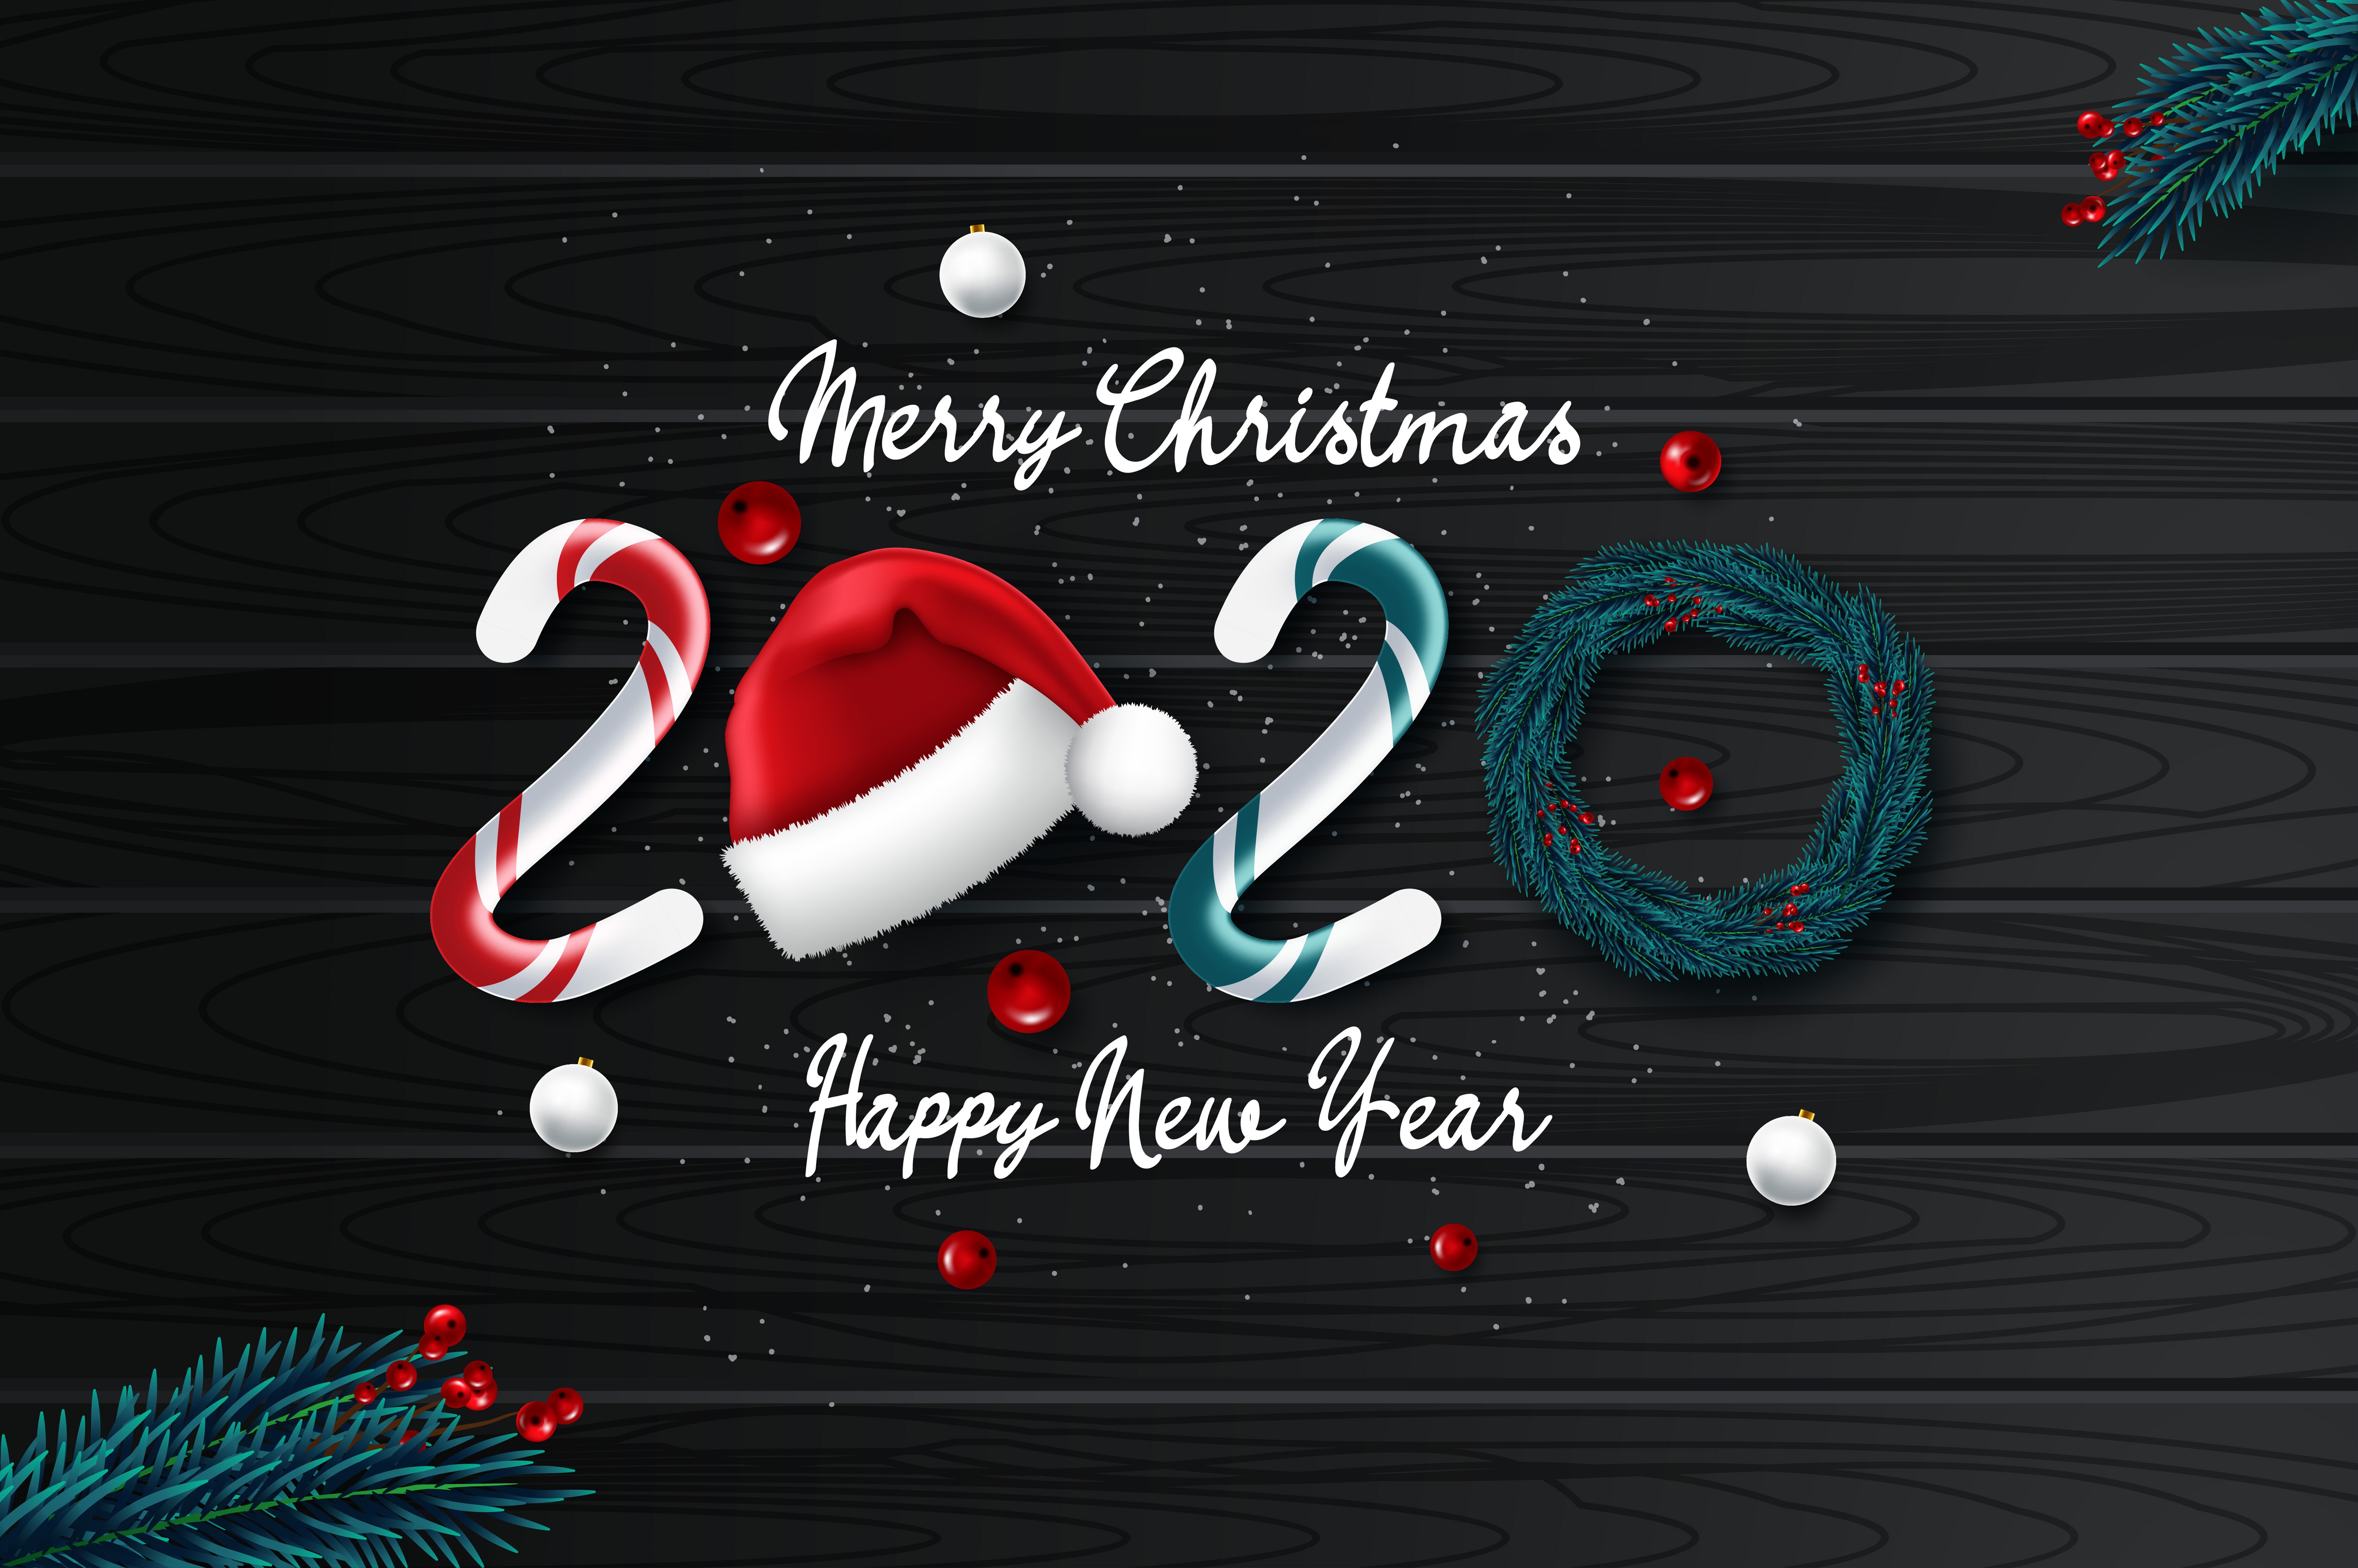 holiday, new year 2020, happy new year, merry christmas